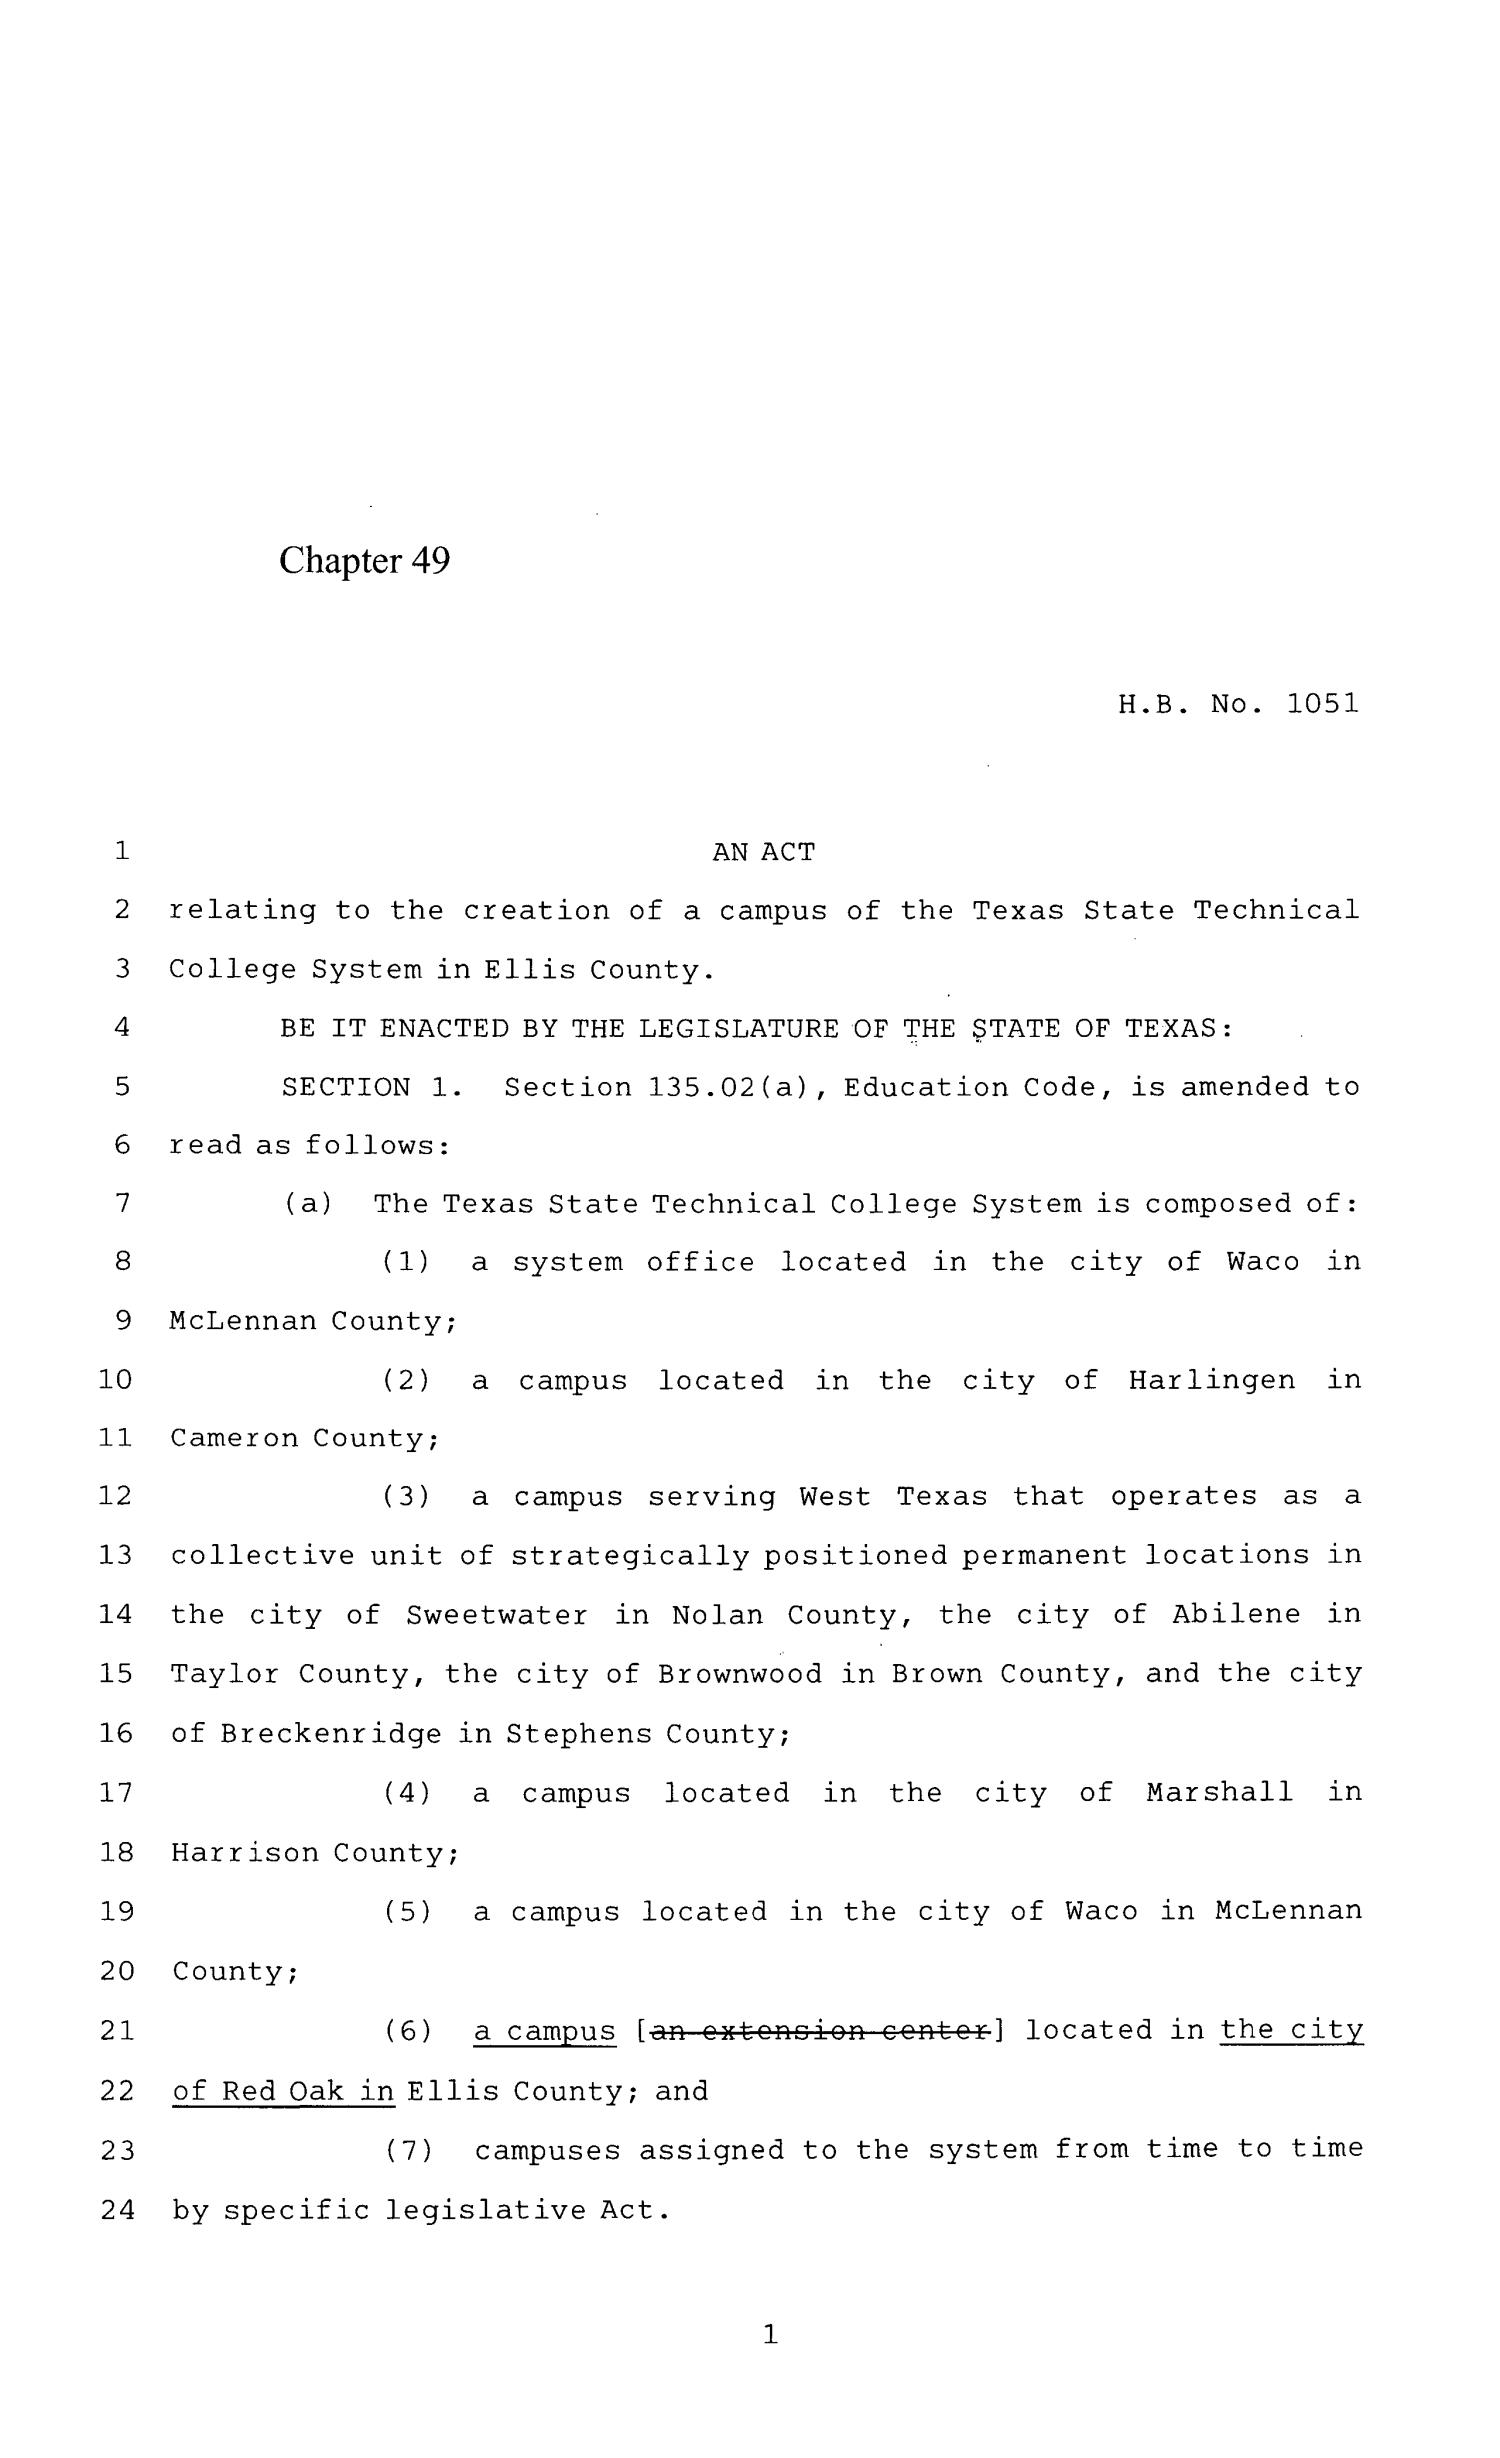 84th Texas Legislature, Regular Session, House Bill 1051, Chapter 49
                                                
                                                    [Sequence #]: 1 of 12
                                                